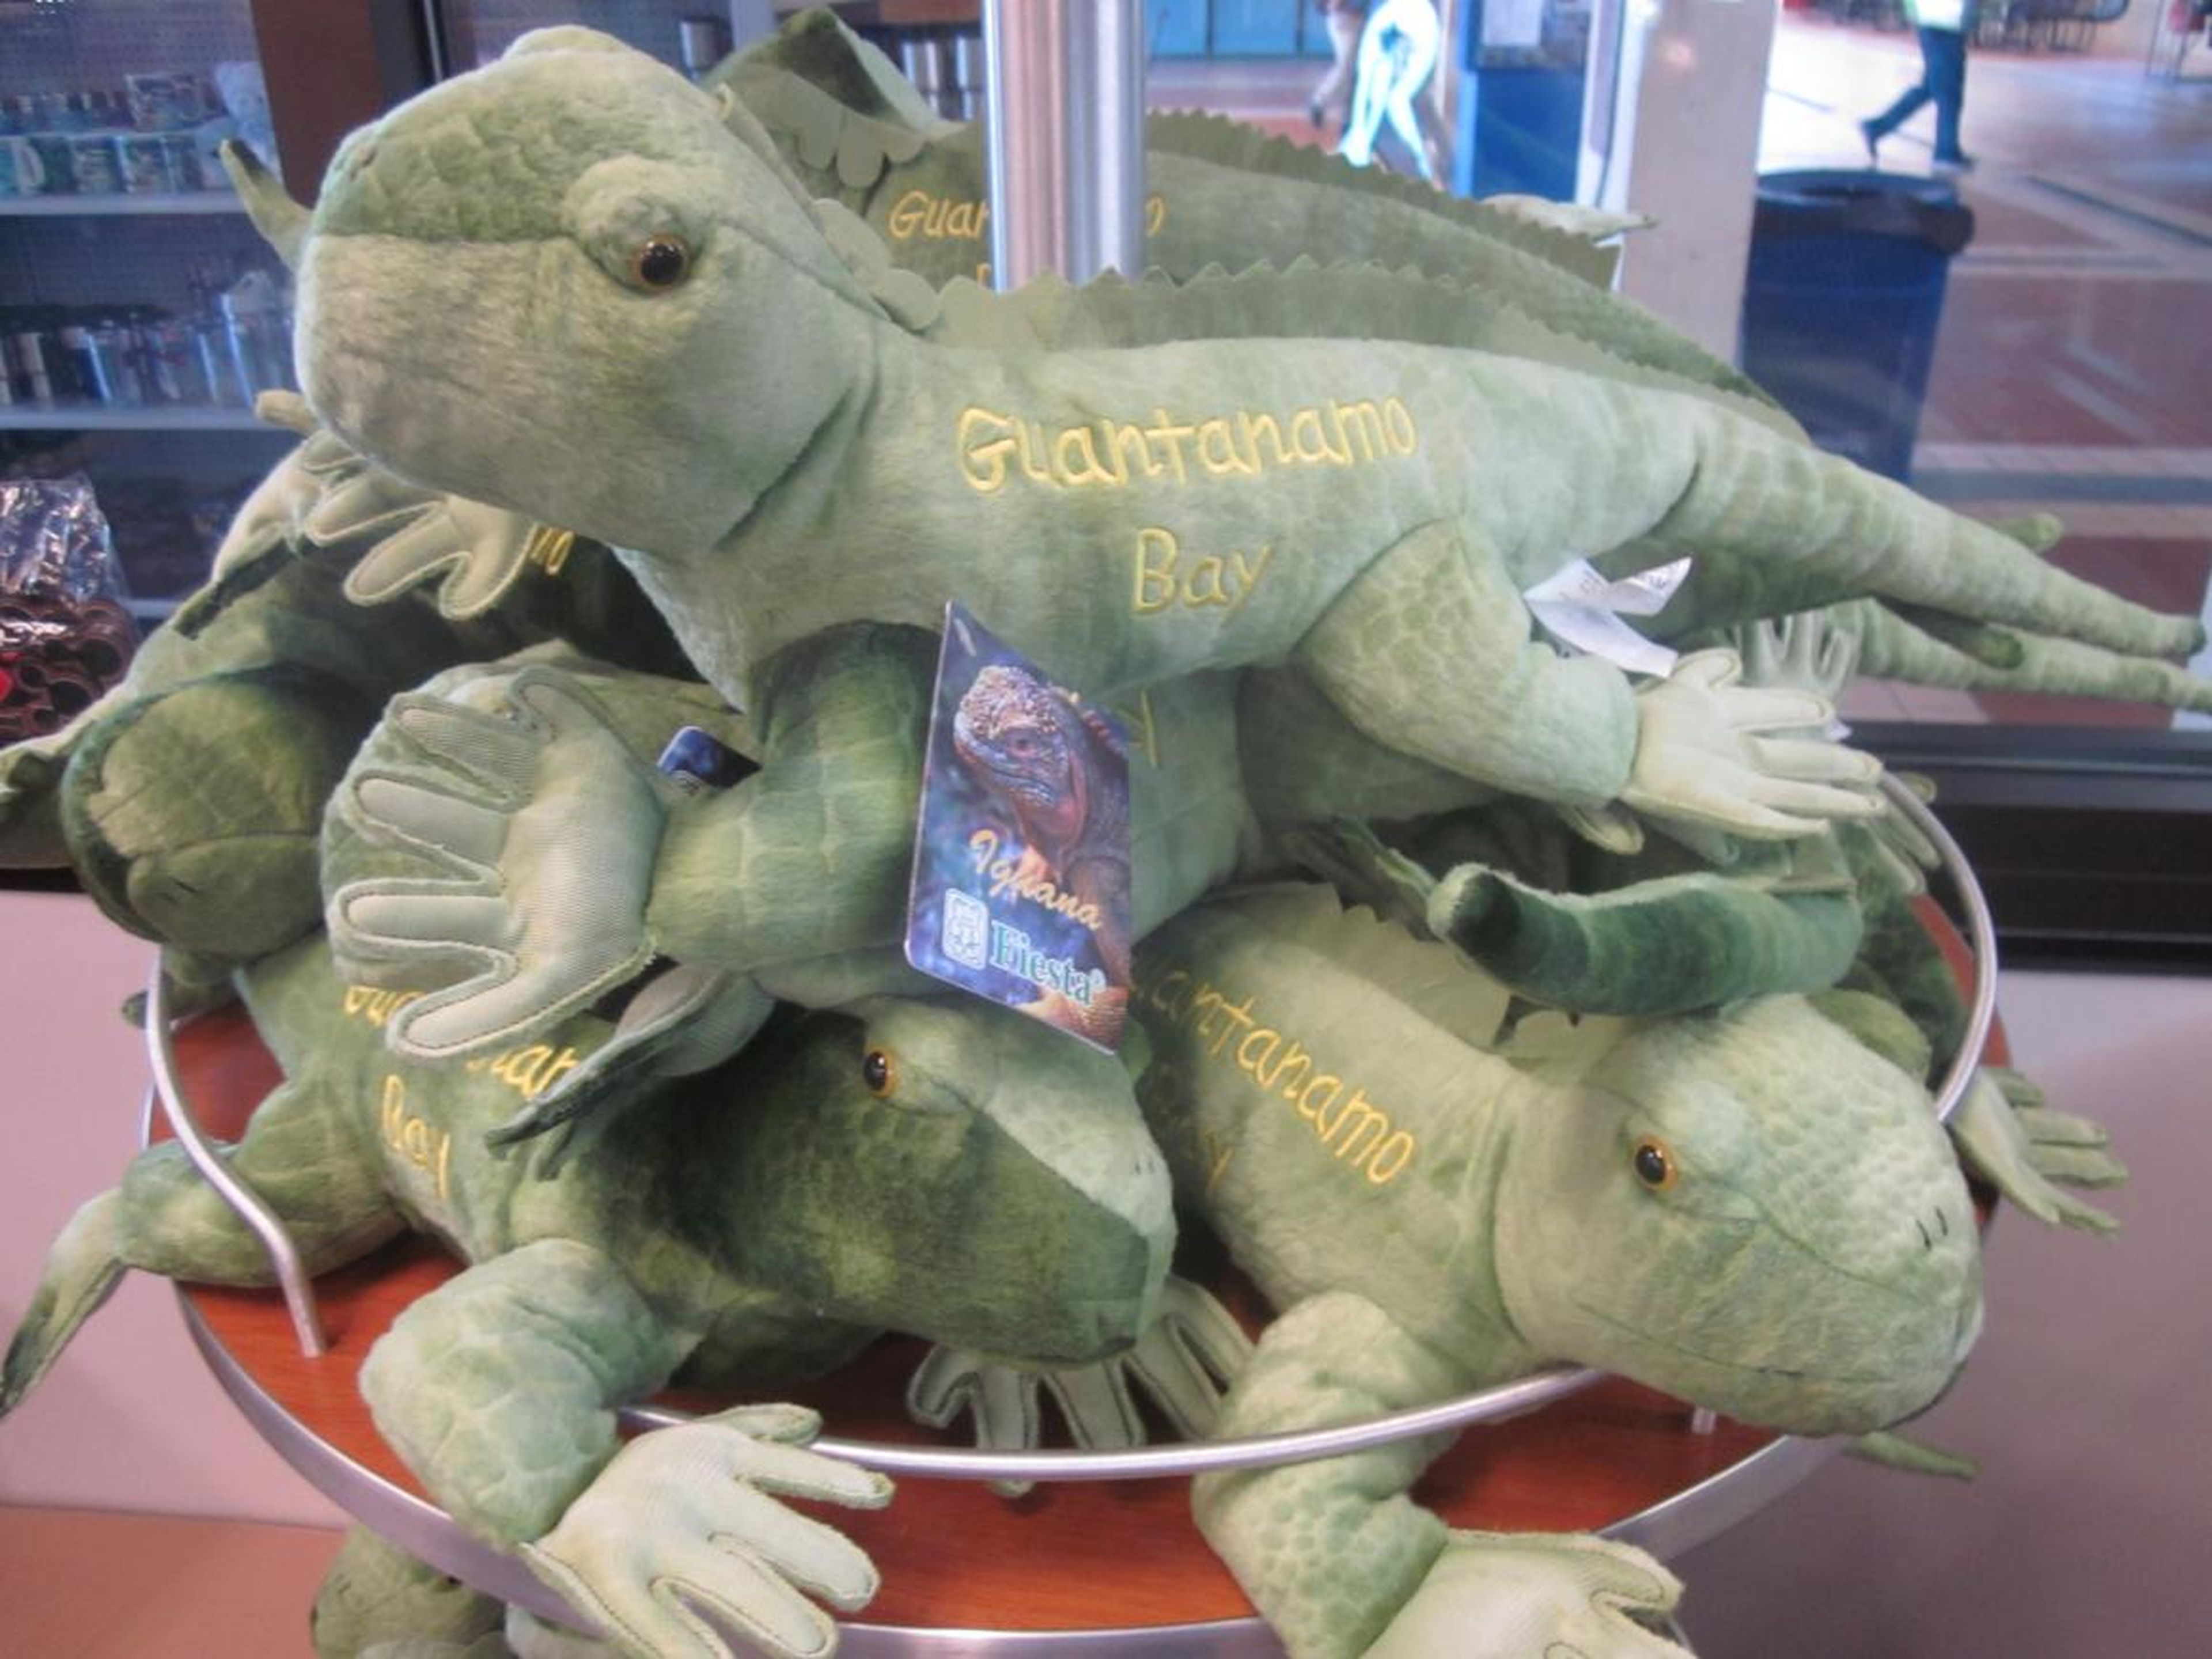 ... or this branded, stuffed lizard-like creature. "The image the items in the gift shop presents is that Guantanamo is a 'fun in the sun, place full of exotic animals and beaches," Mirk said.